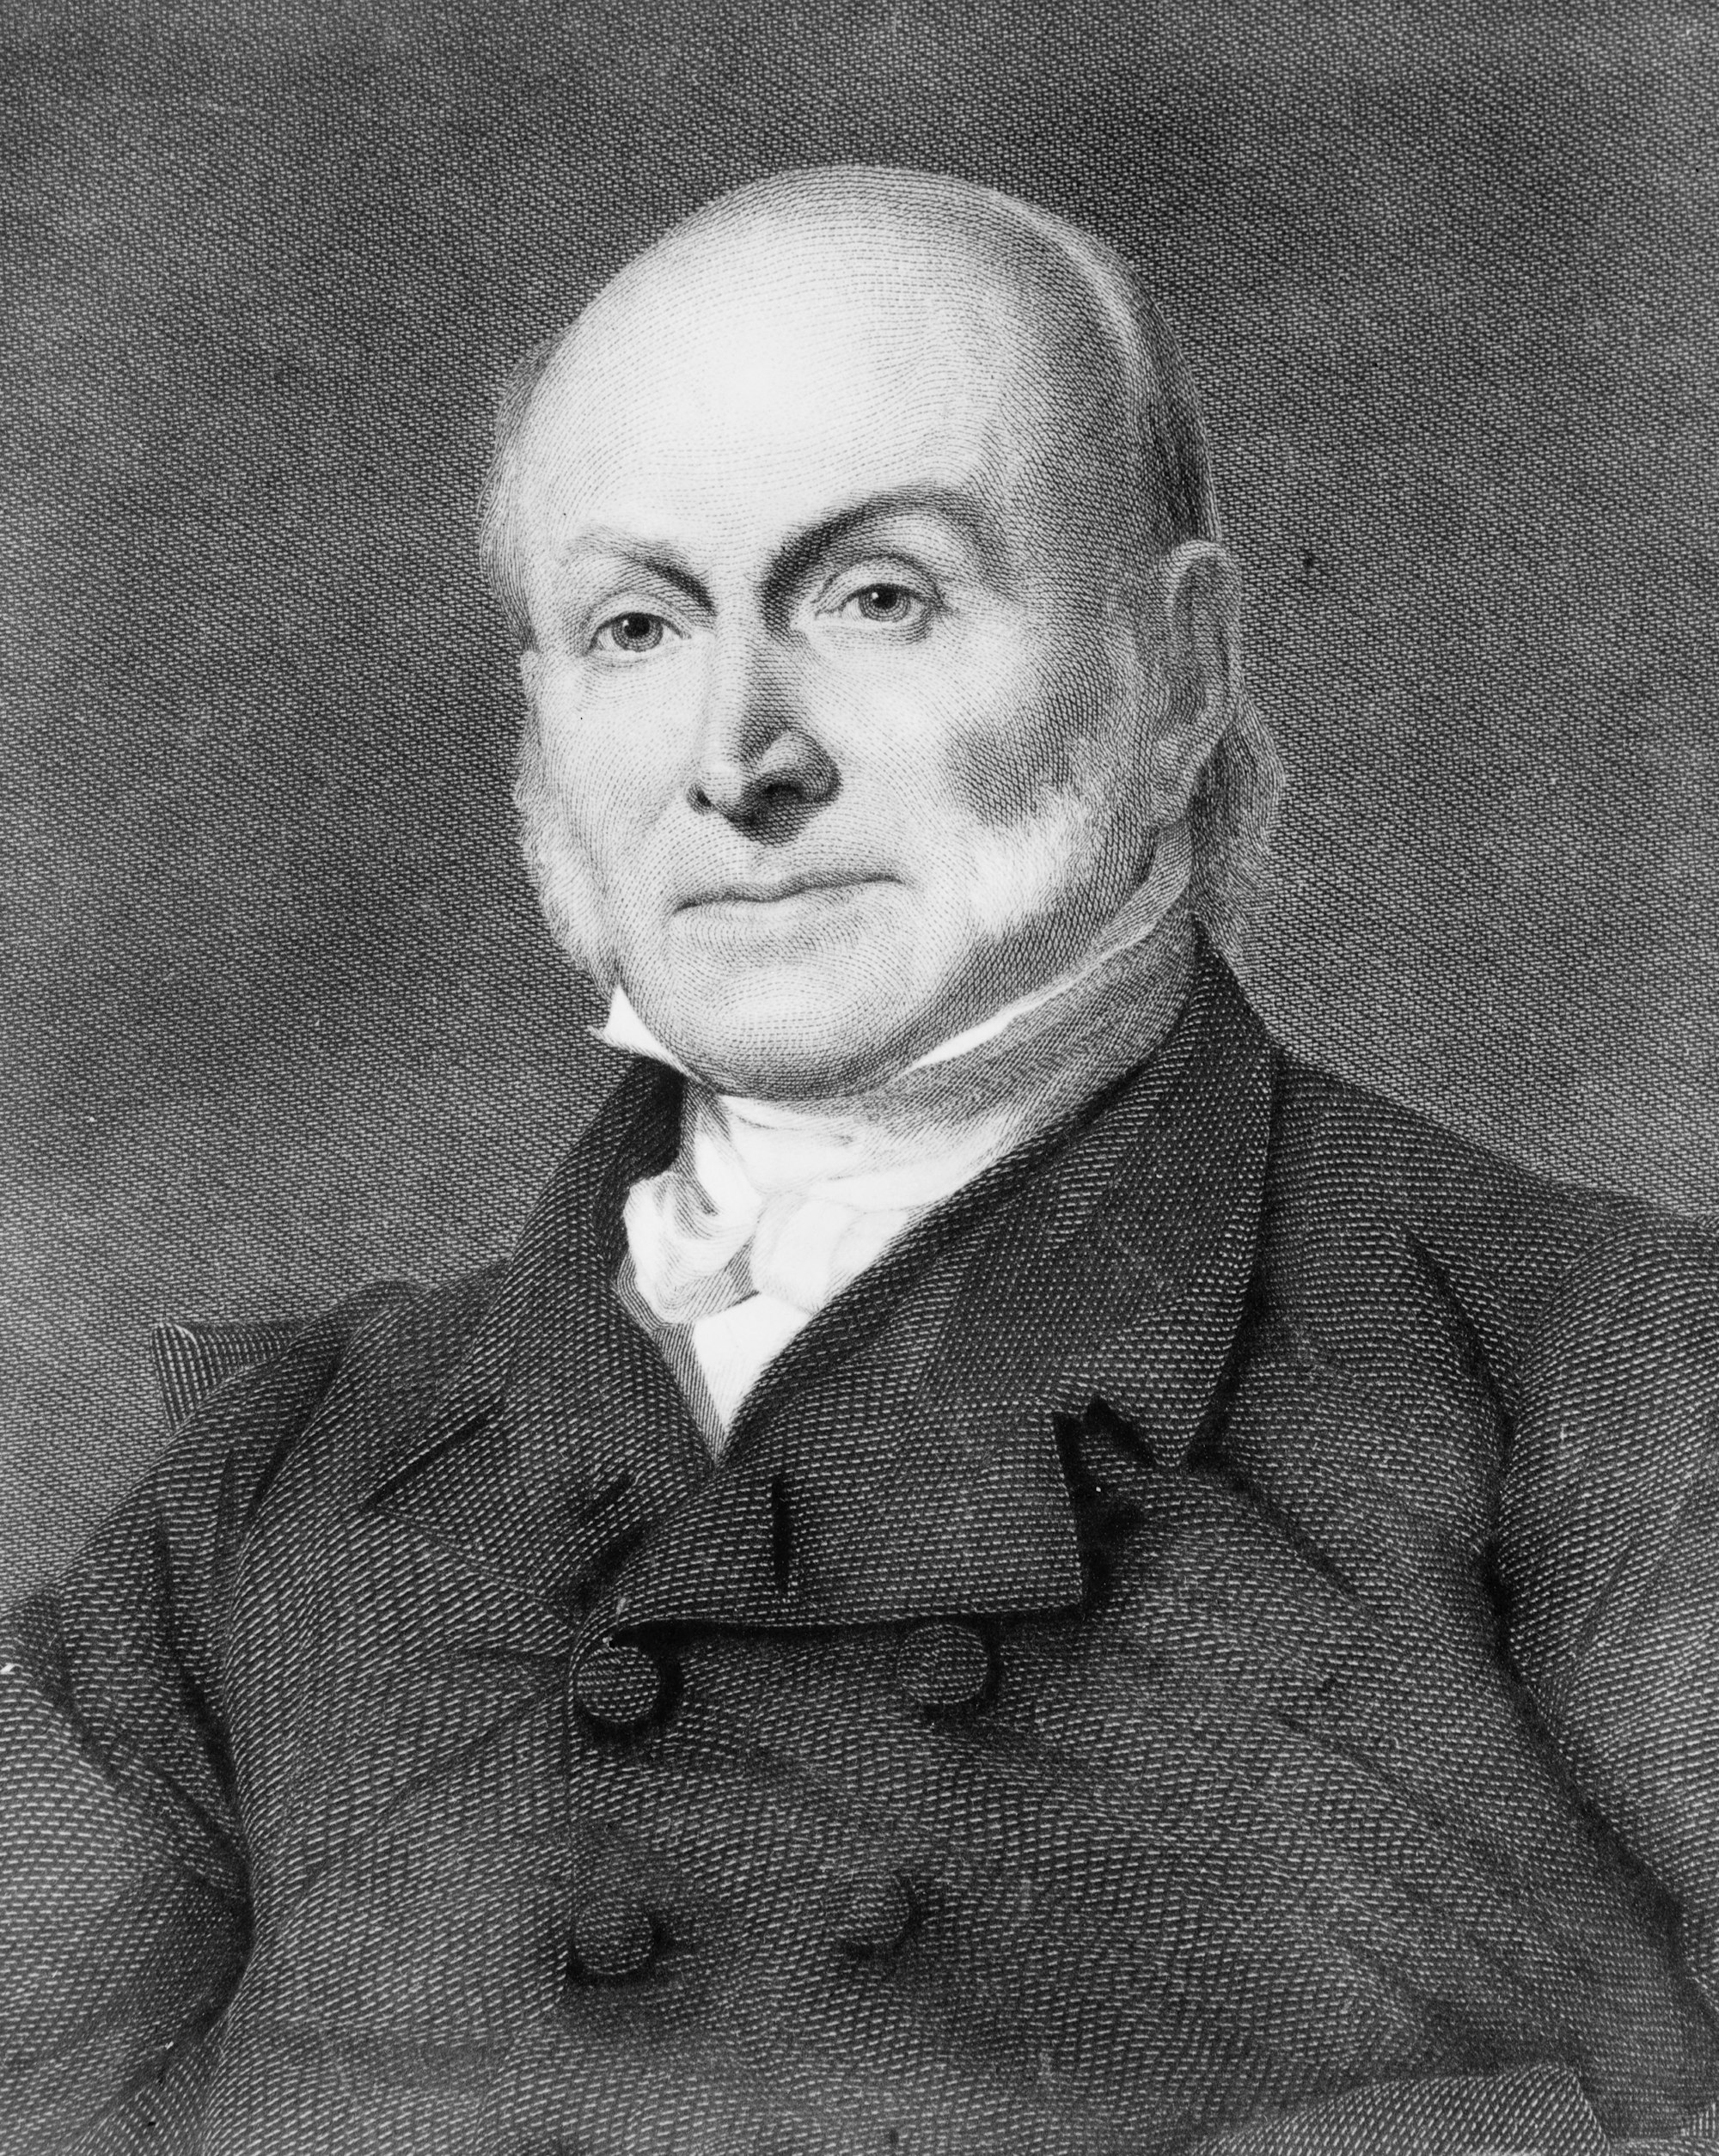 These Confederated States and the Right of Revolution: Thoughts by John Quincy Adams, 1838